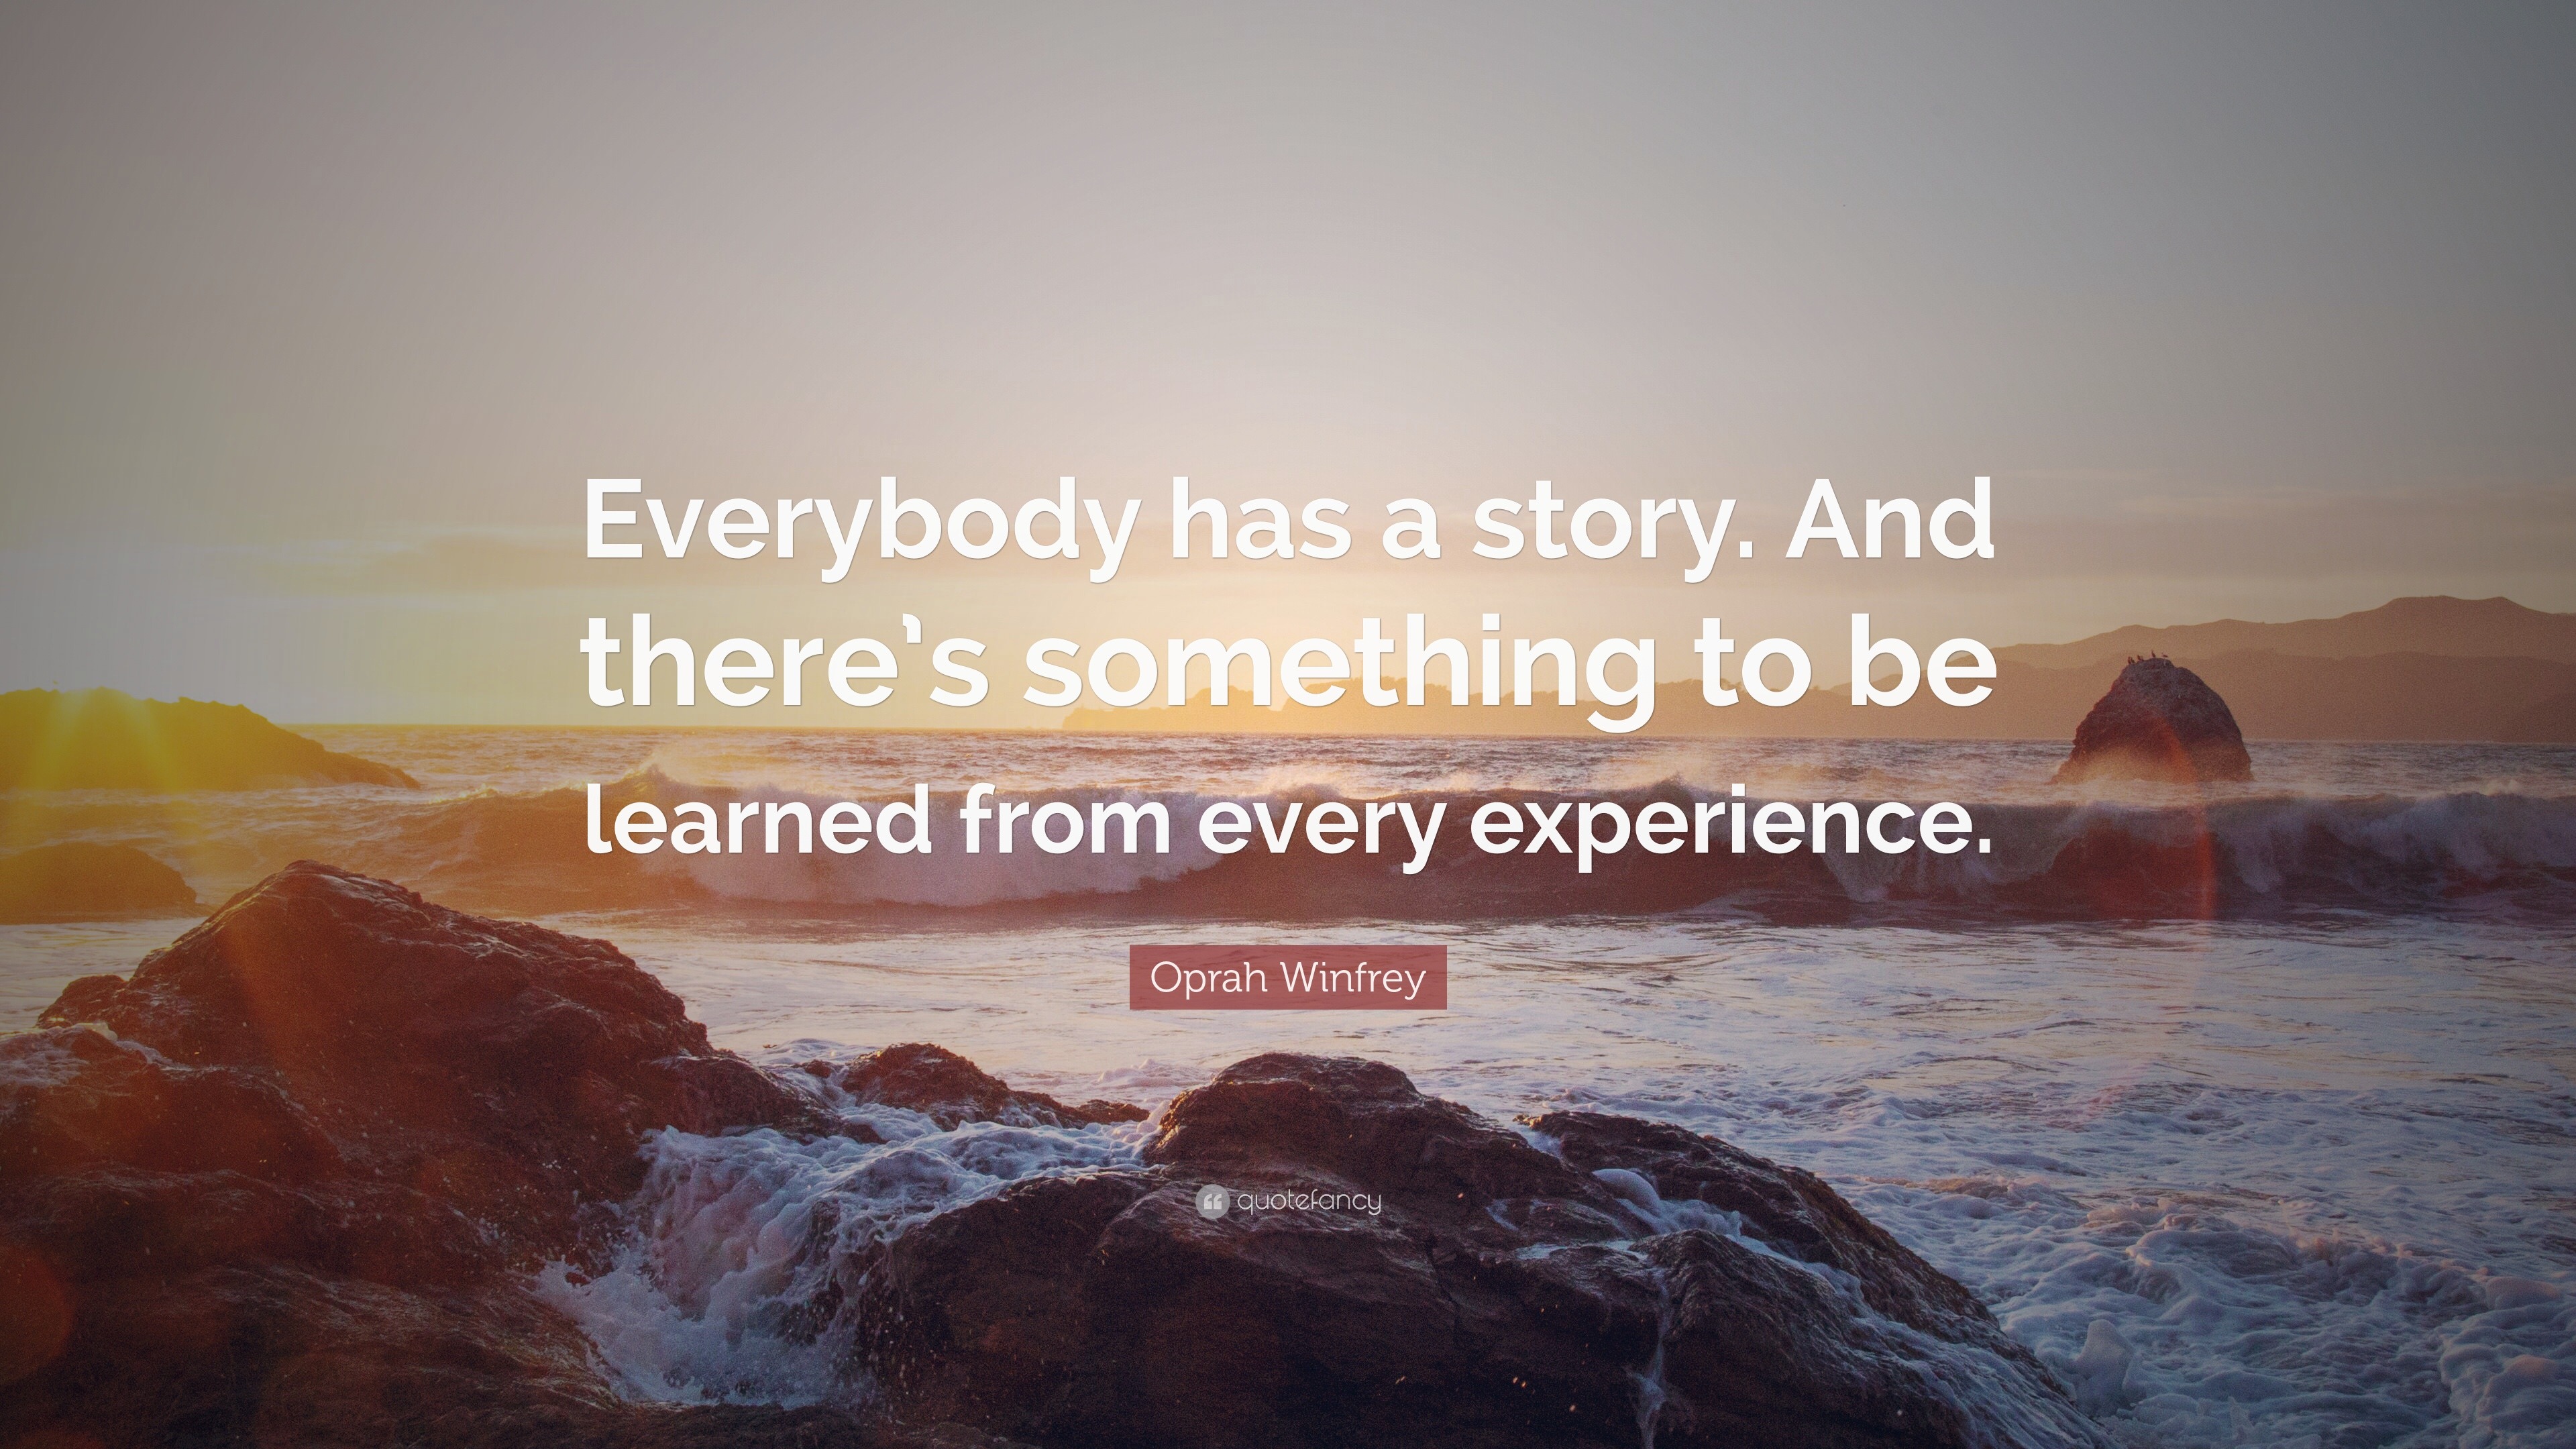 Oprah Winfrey Quote Everybody Has A Story And There S Something To Be Learned From Every Experience